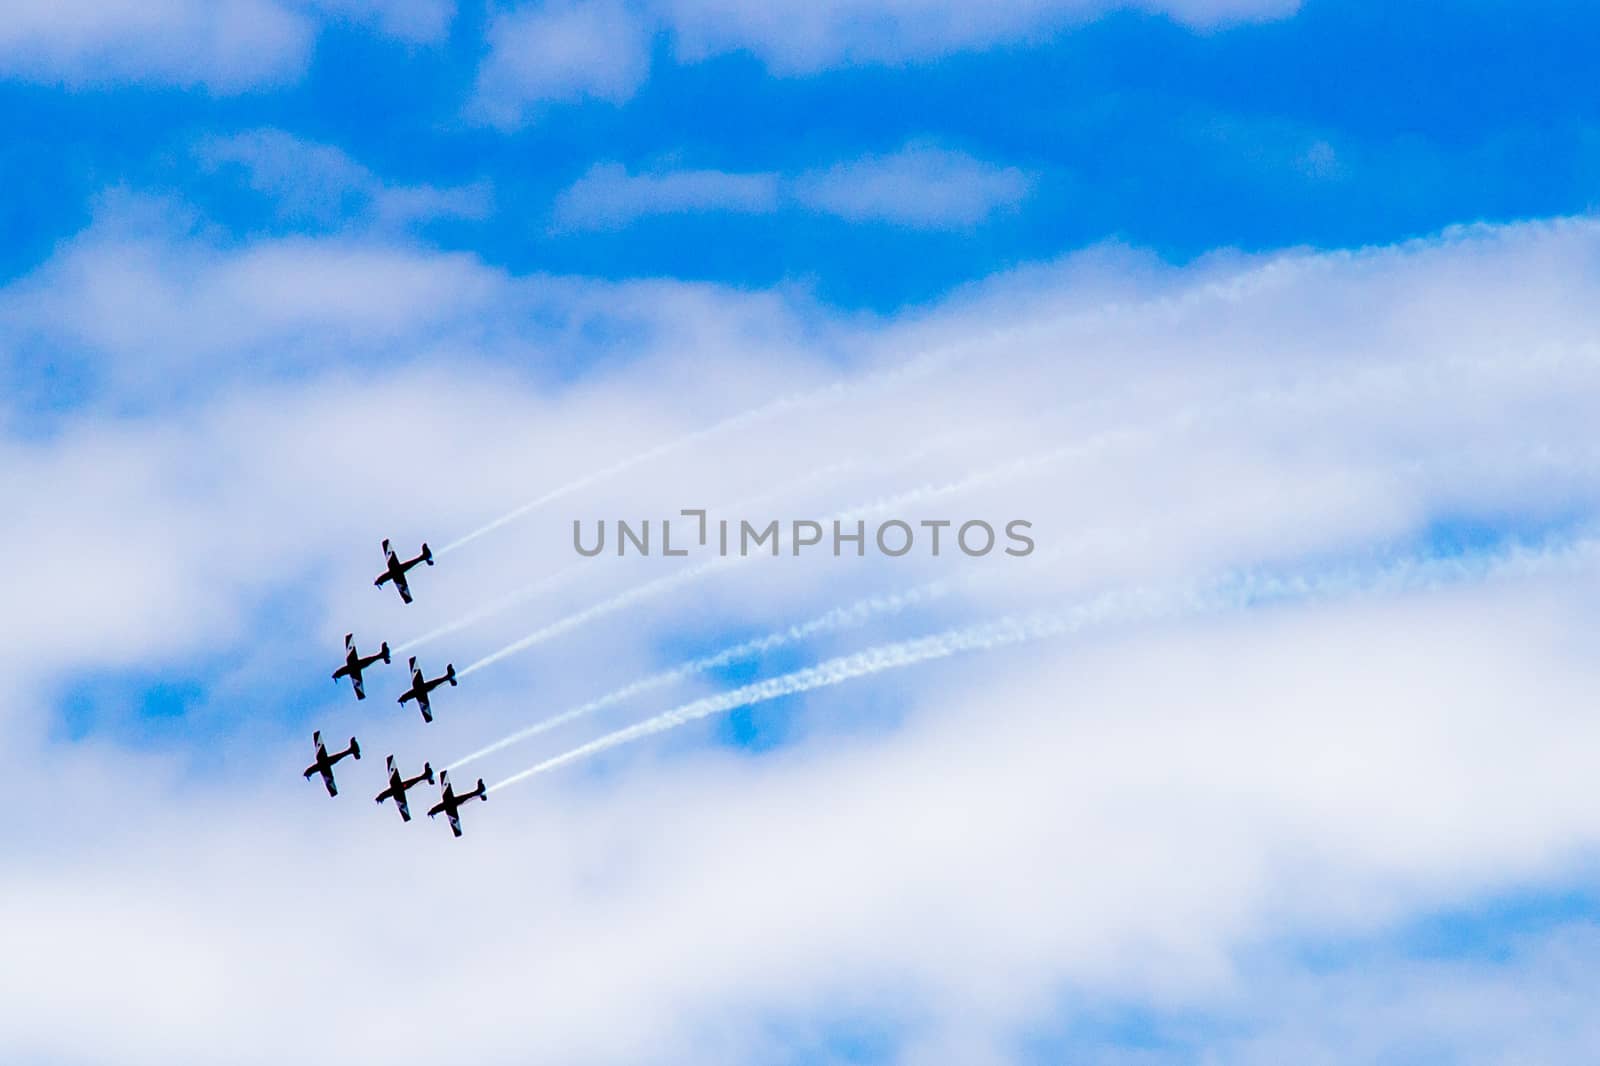 The Roulettes plane formation aerobatic display